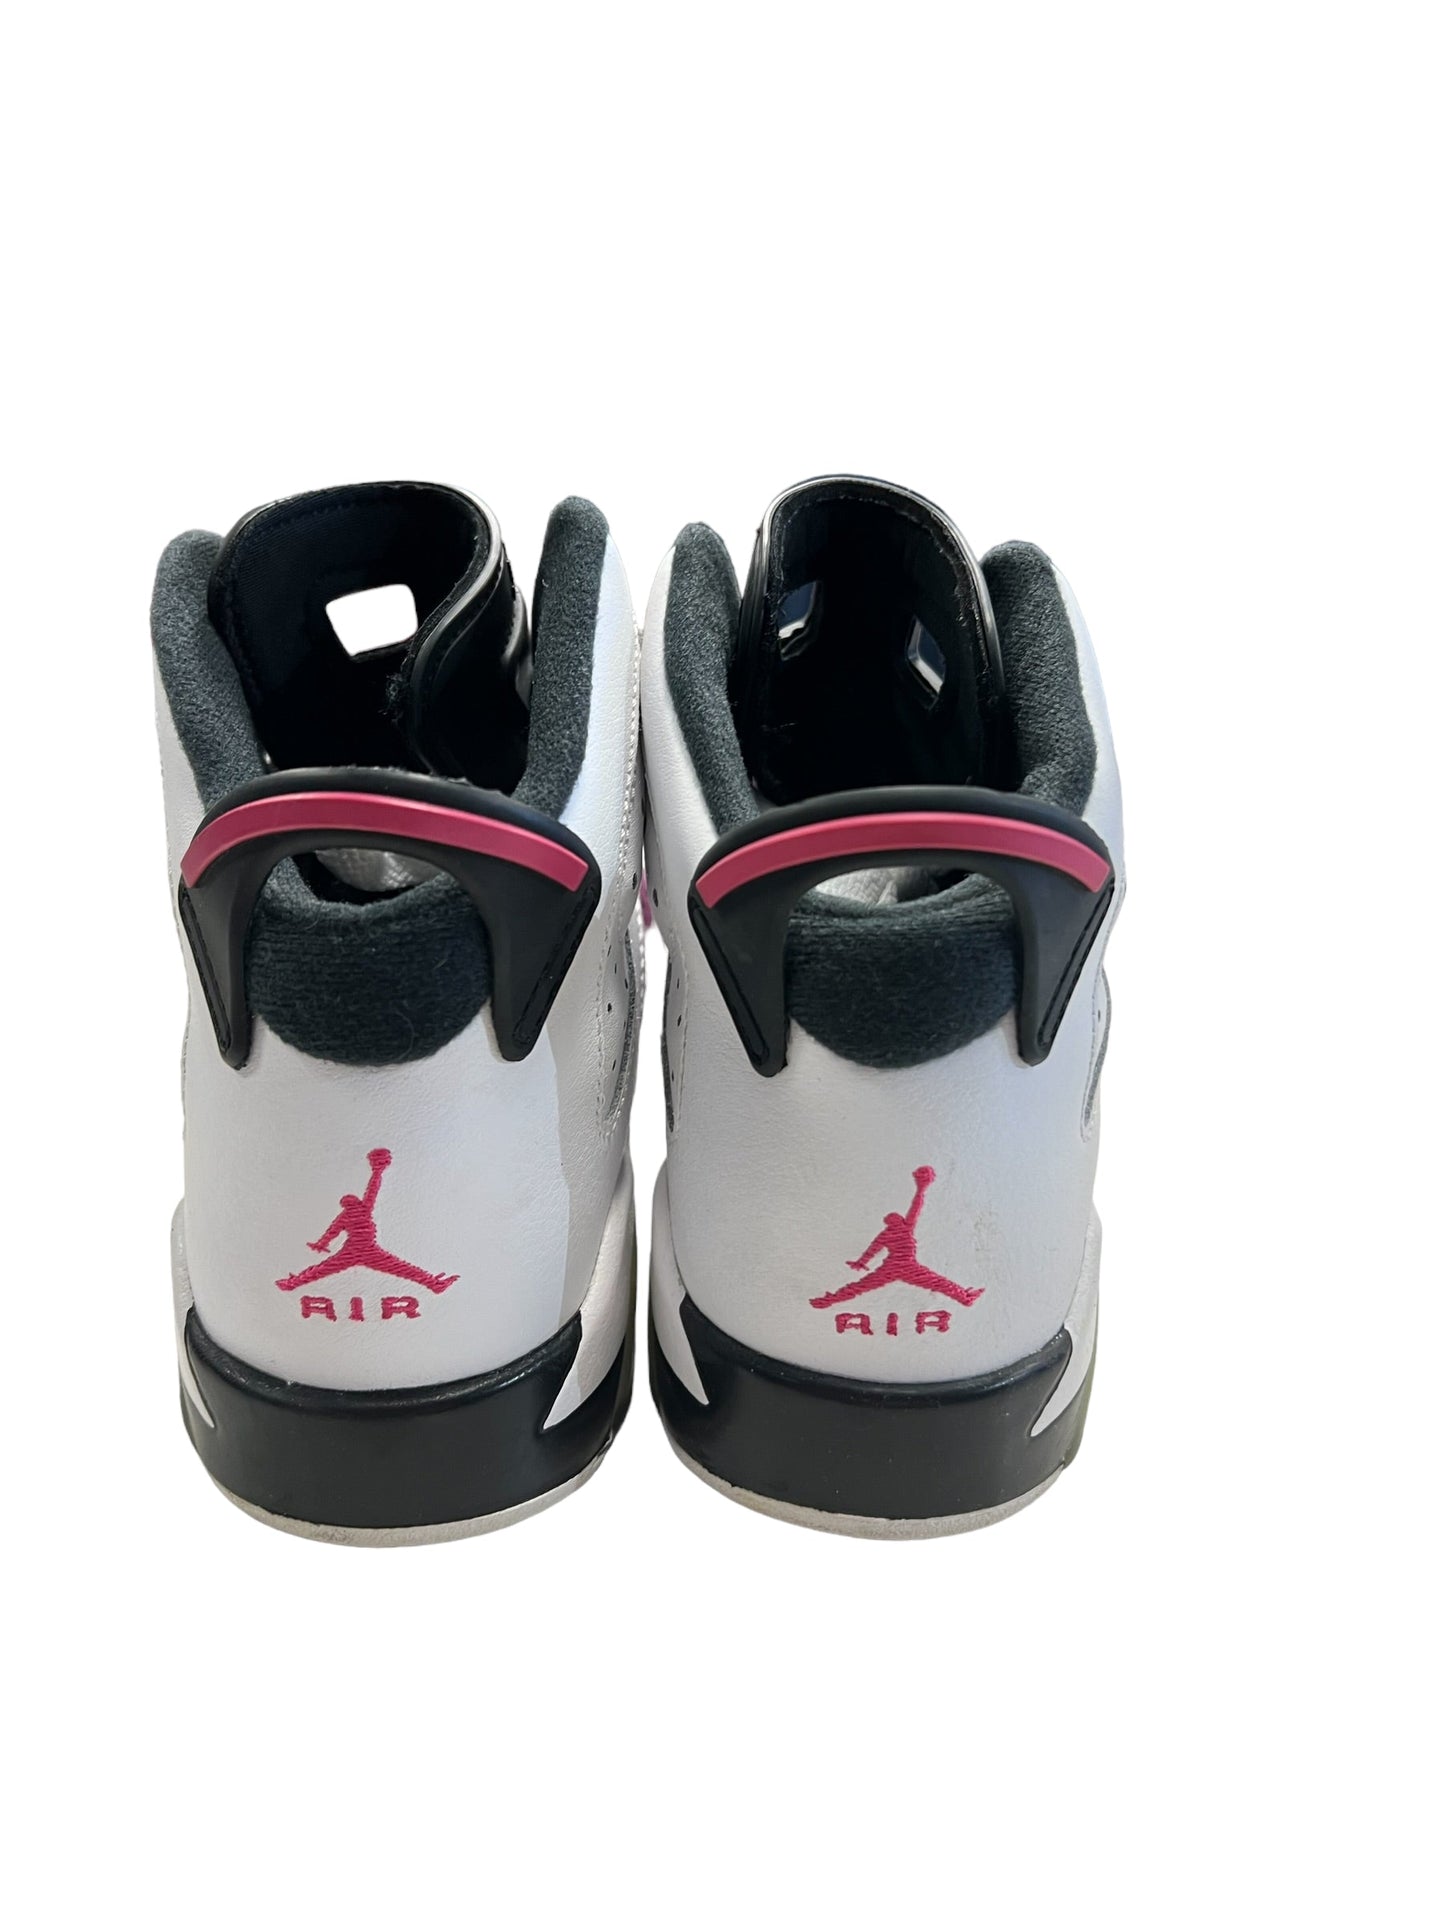 Shoes Athletic By Jordan  Size: 8